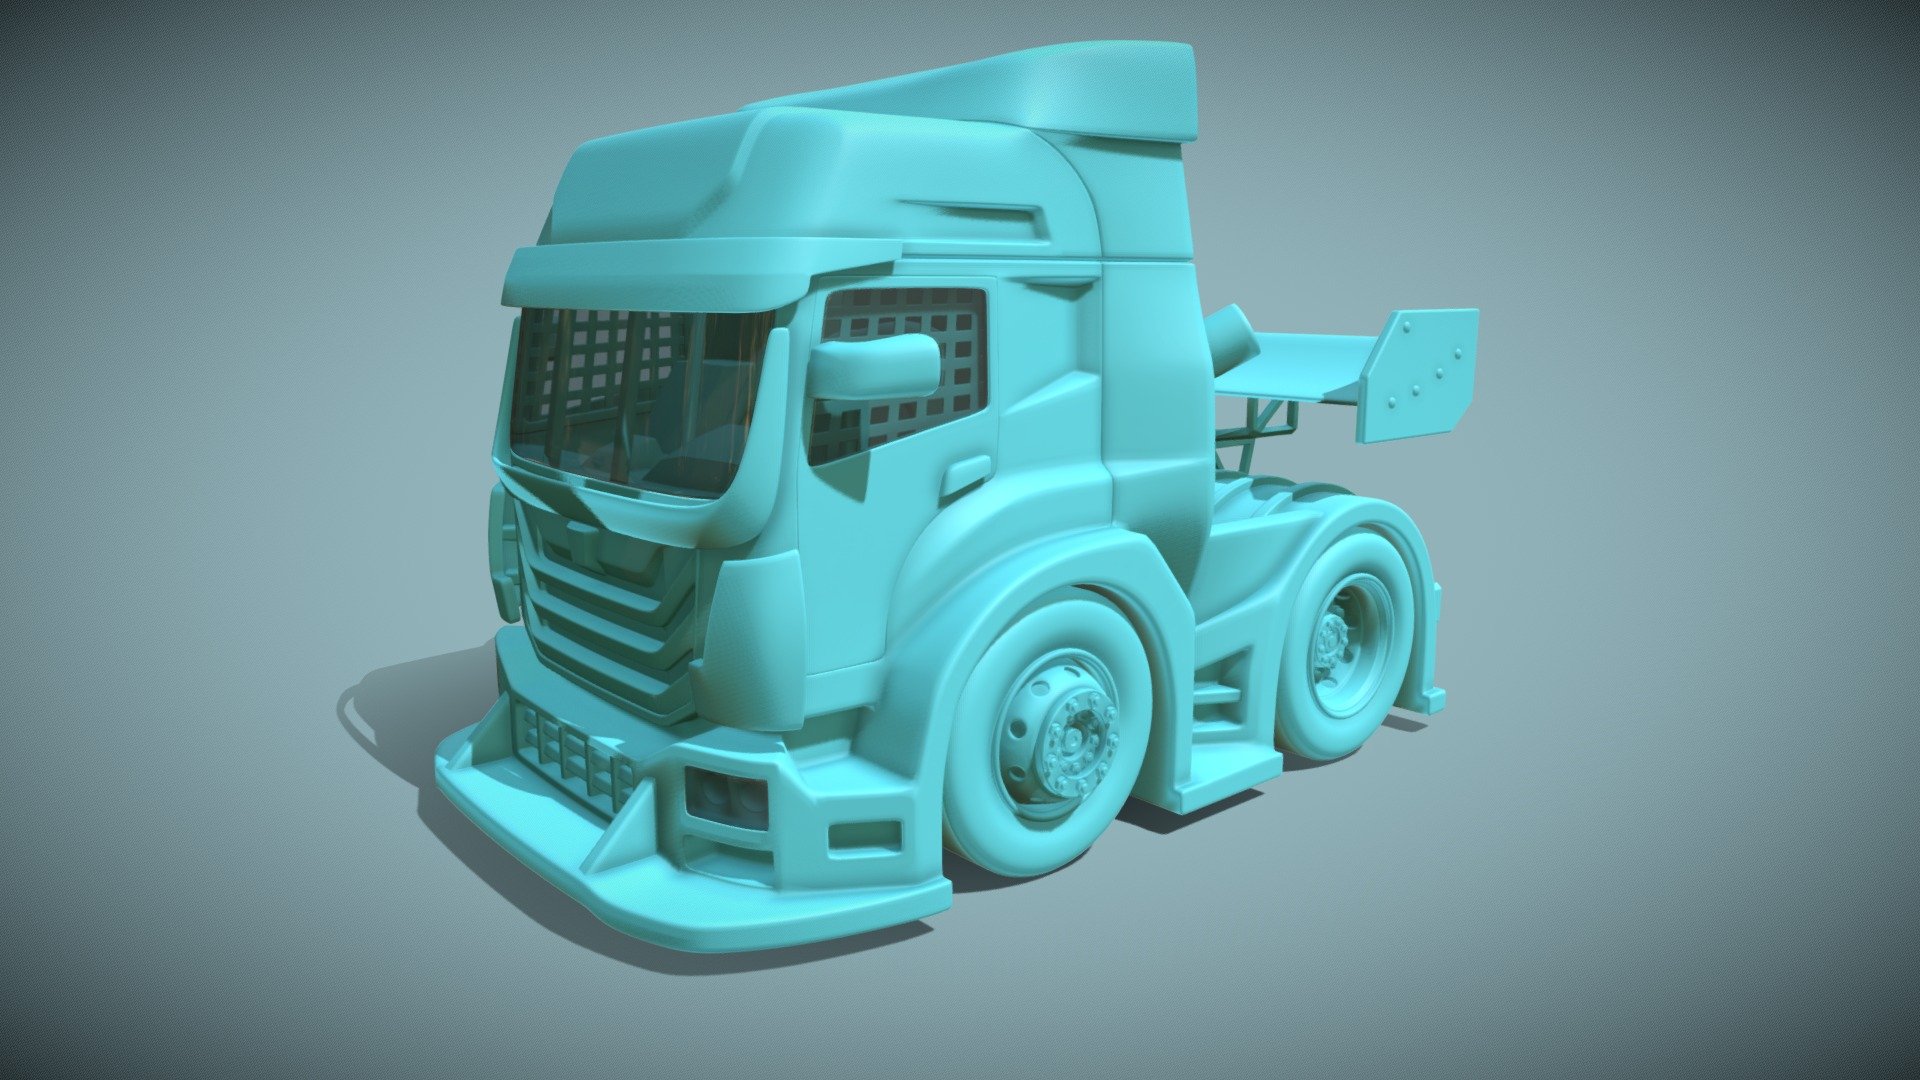 3d model of truck_racing toon.
N.B. if used for 3d prints there are non-optimized pieces that could create some problems 3d model